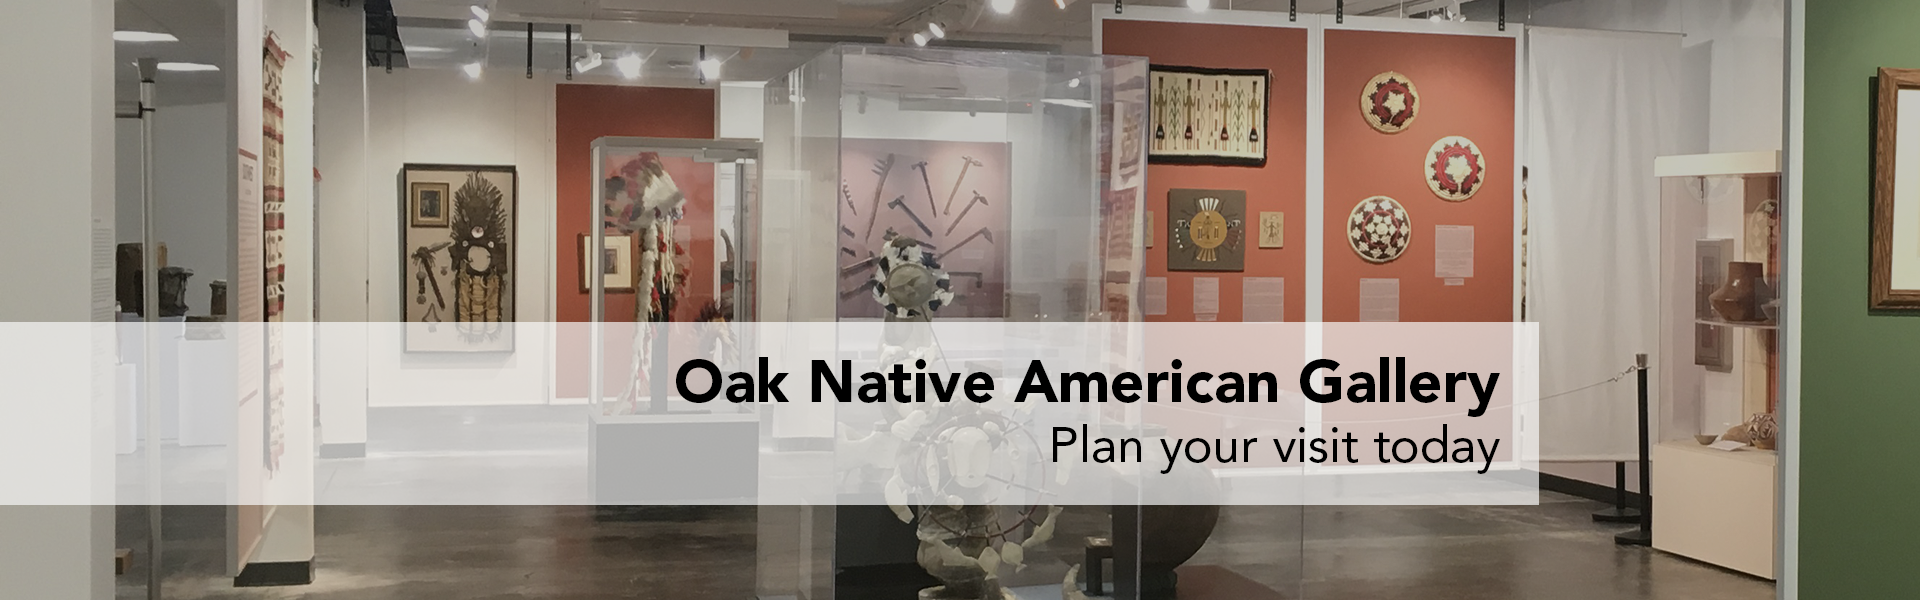 Oak Native American Gallery - Plan Your Visit Today